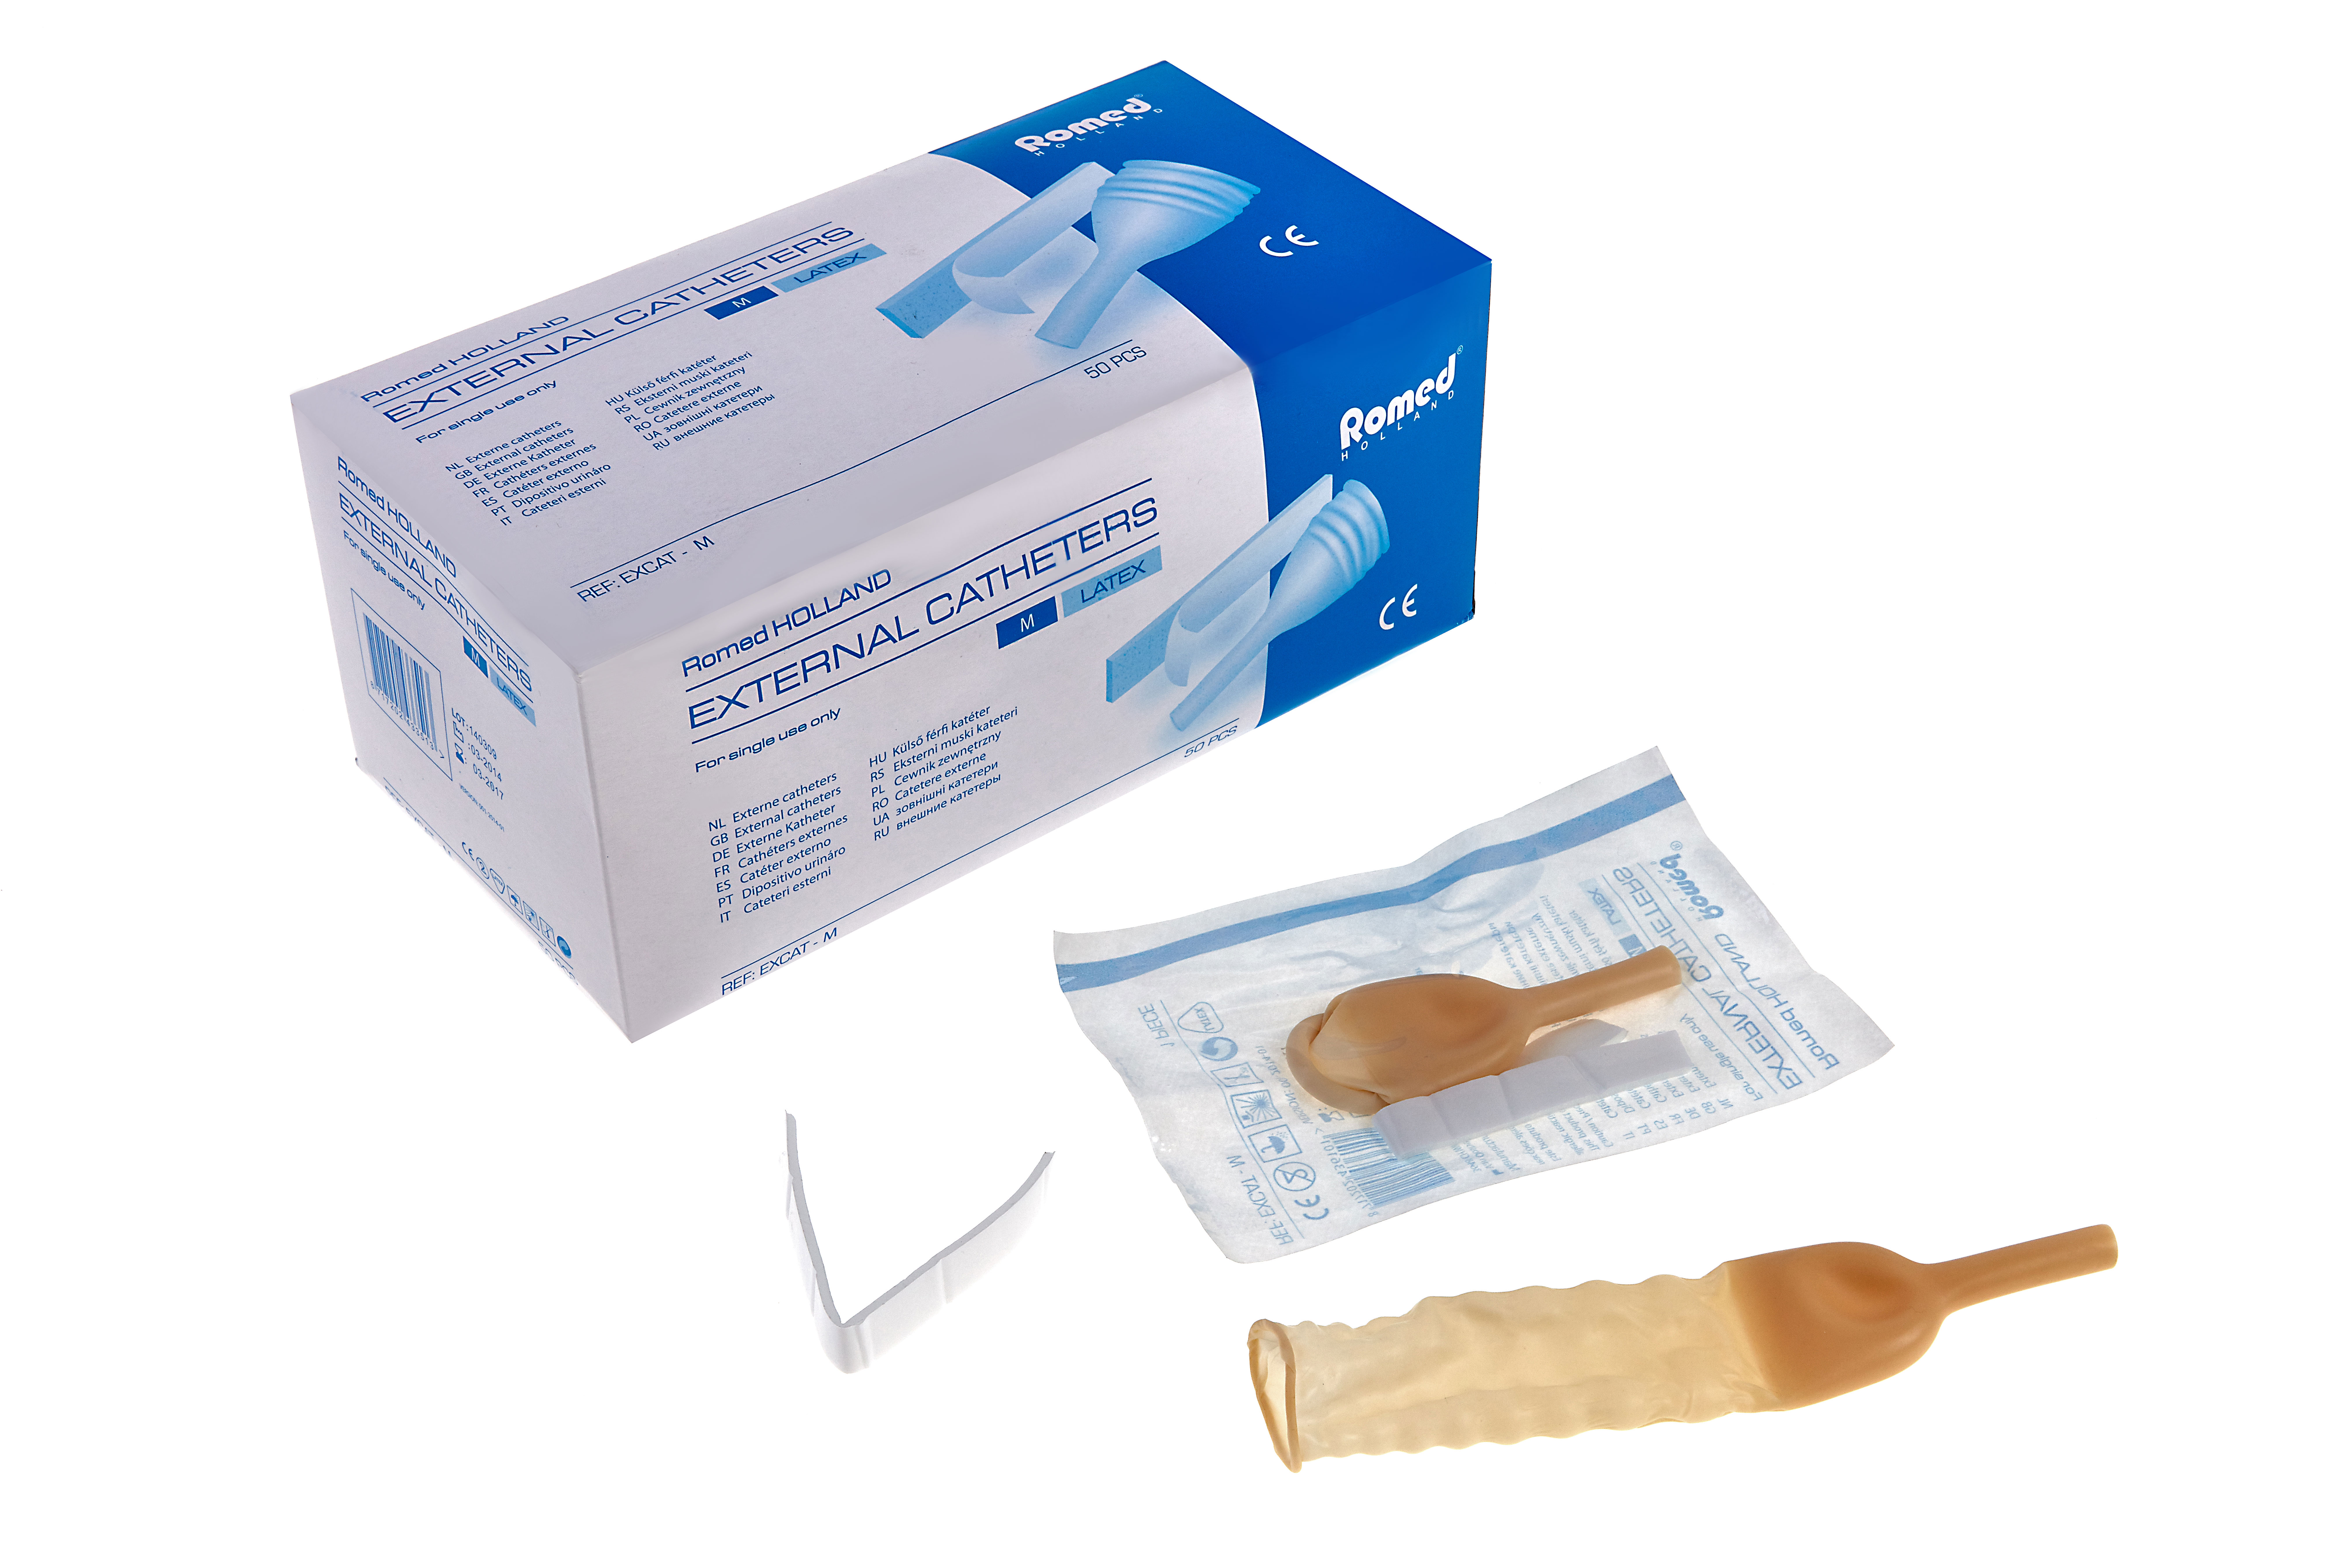 EXCAT-S Romed external catheters latex, with adhesive strip, Peniflow model, per piece in peel pouch, 50 pcs in an inner box, 20 x 50 pcs = 1.000 pcs in a carton.